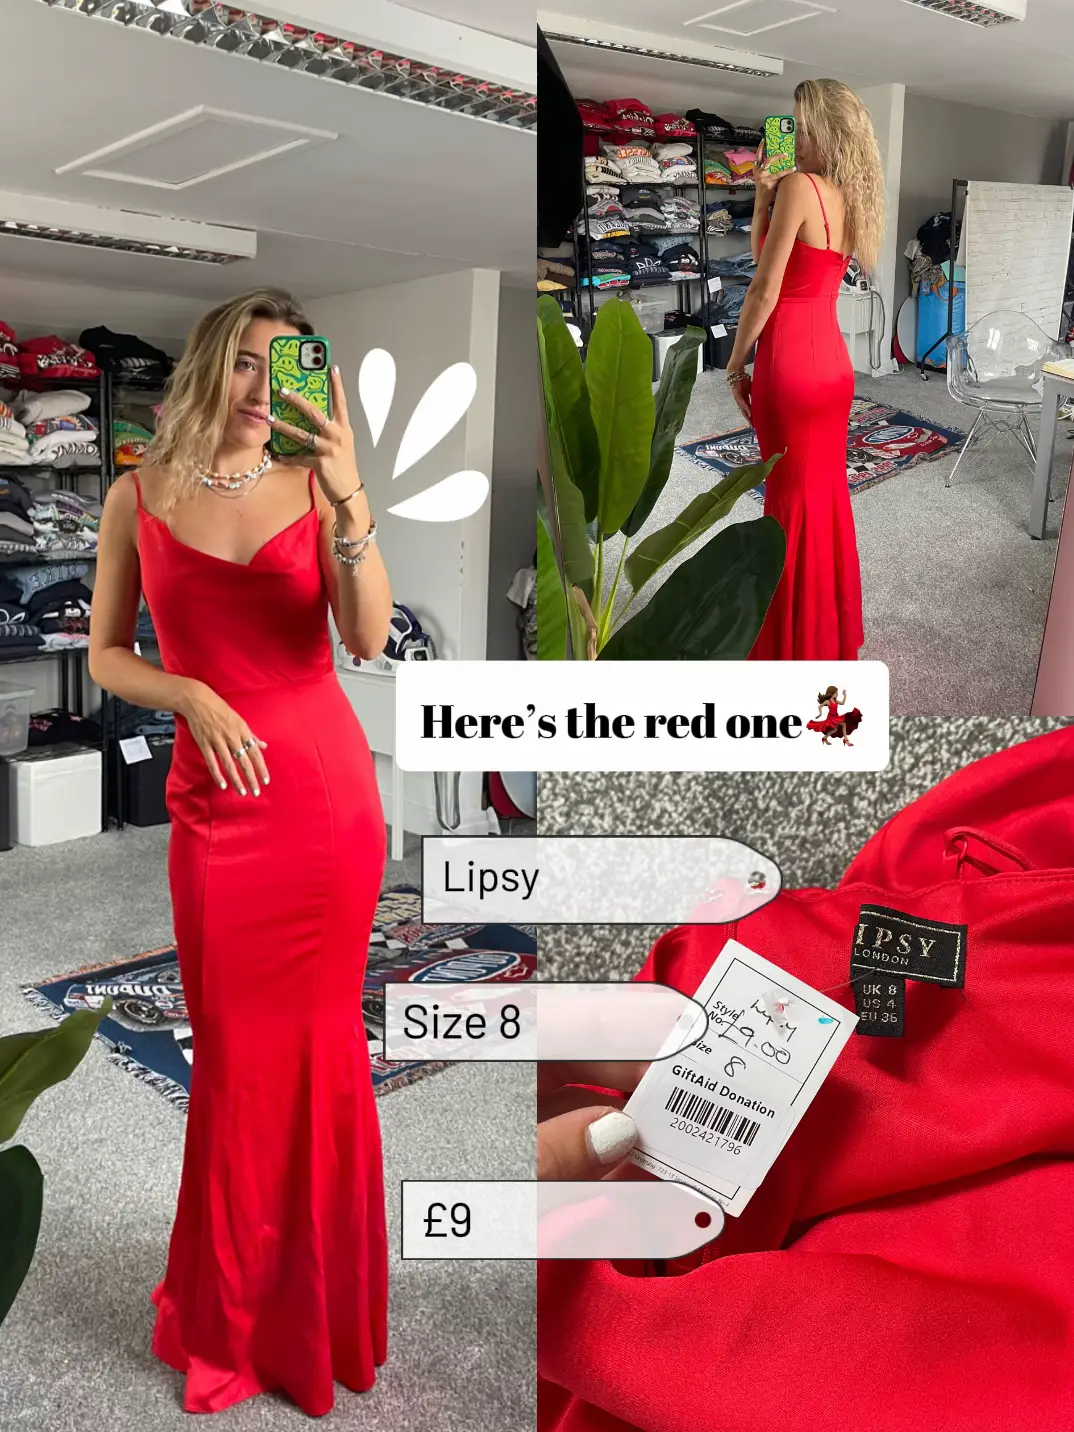 Lipsy Dresses for women  Buy or Sell your Luxury clothing - Vestiaire  Collective